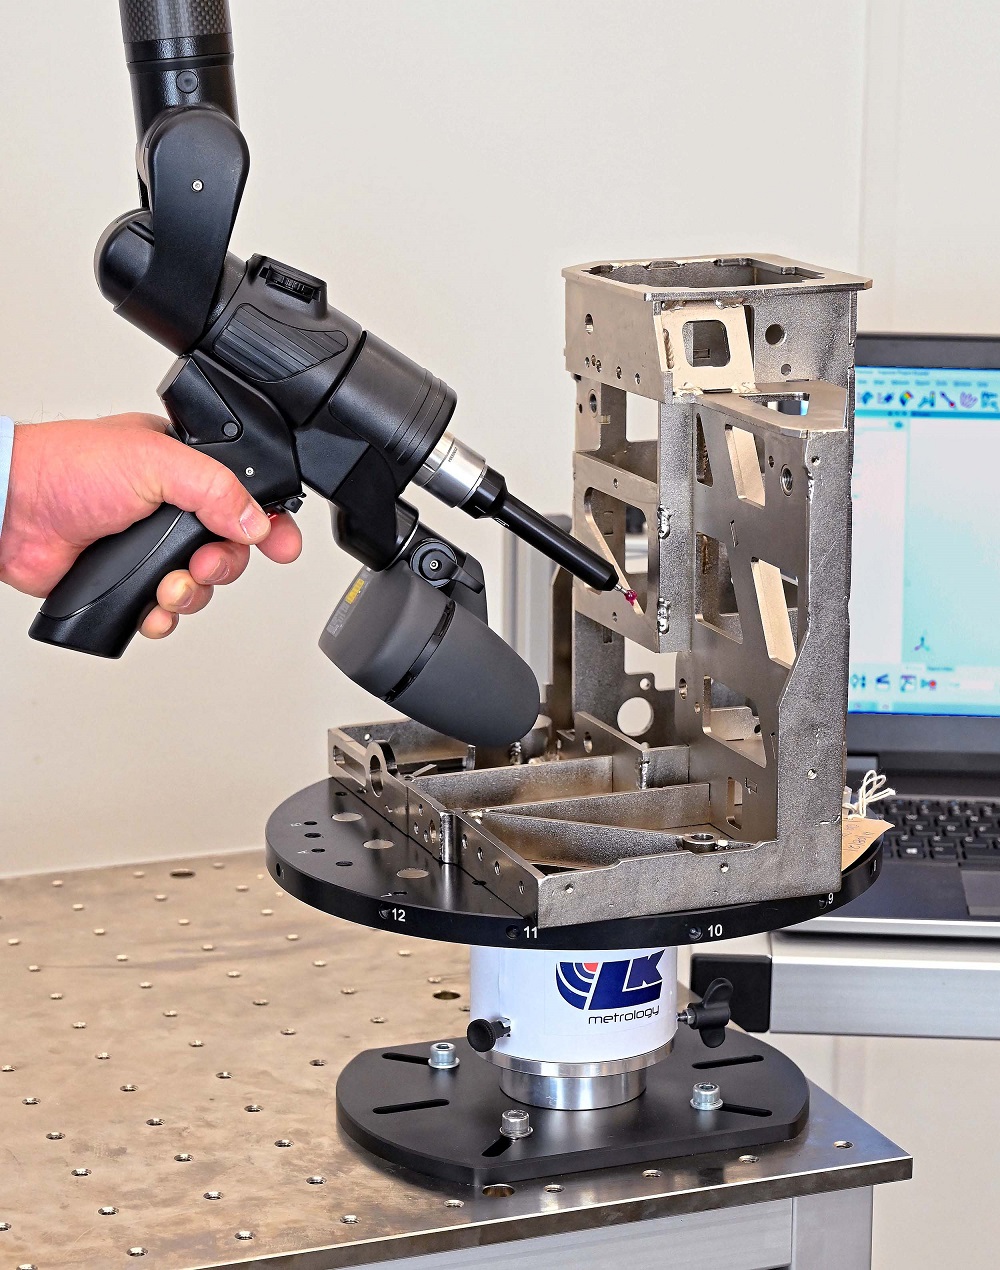 Rotary table raises efficiency of portable arms